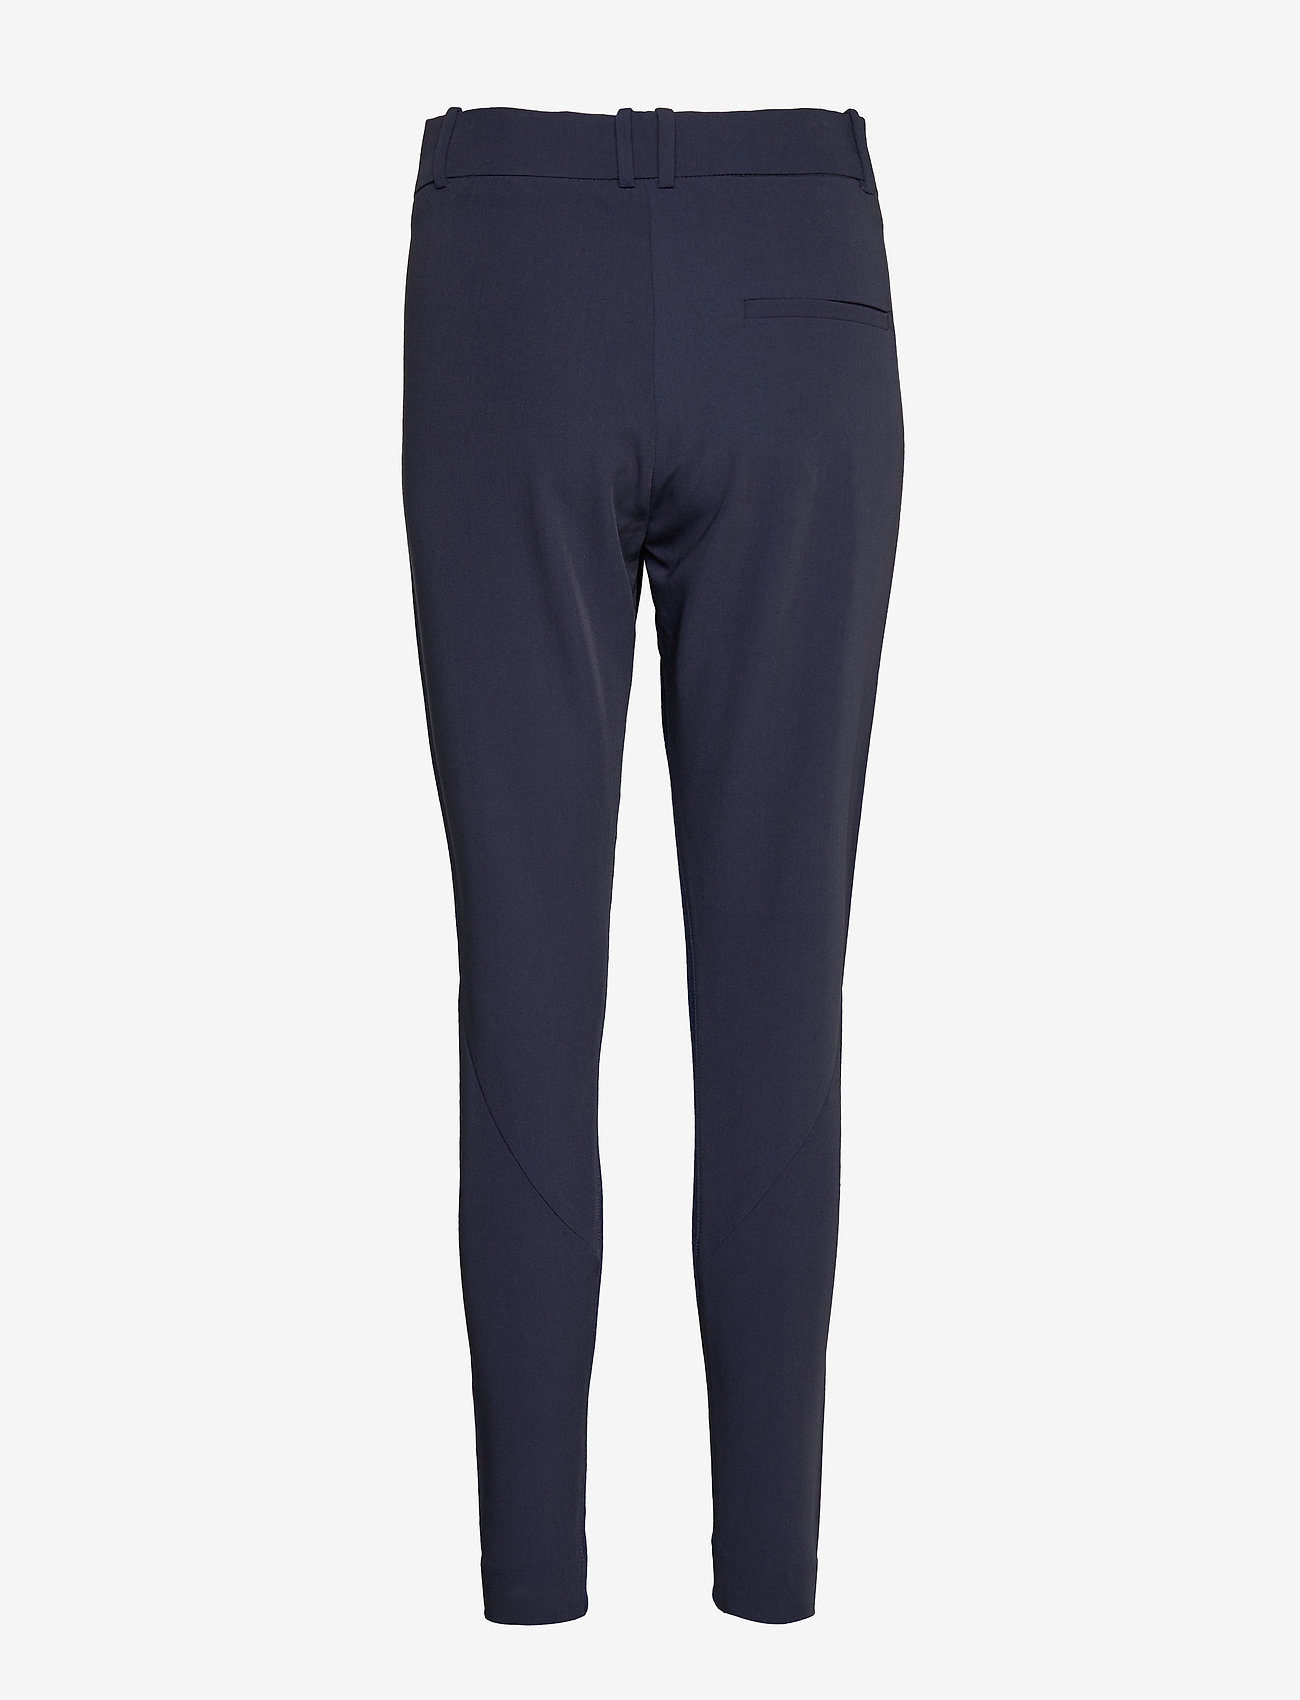 Coster Copenhagen - Suit pants - Coco - trousers with skinny legs - dark blue - 1